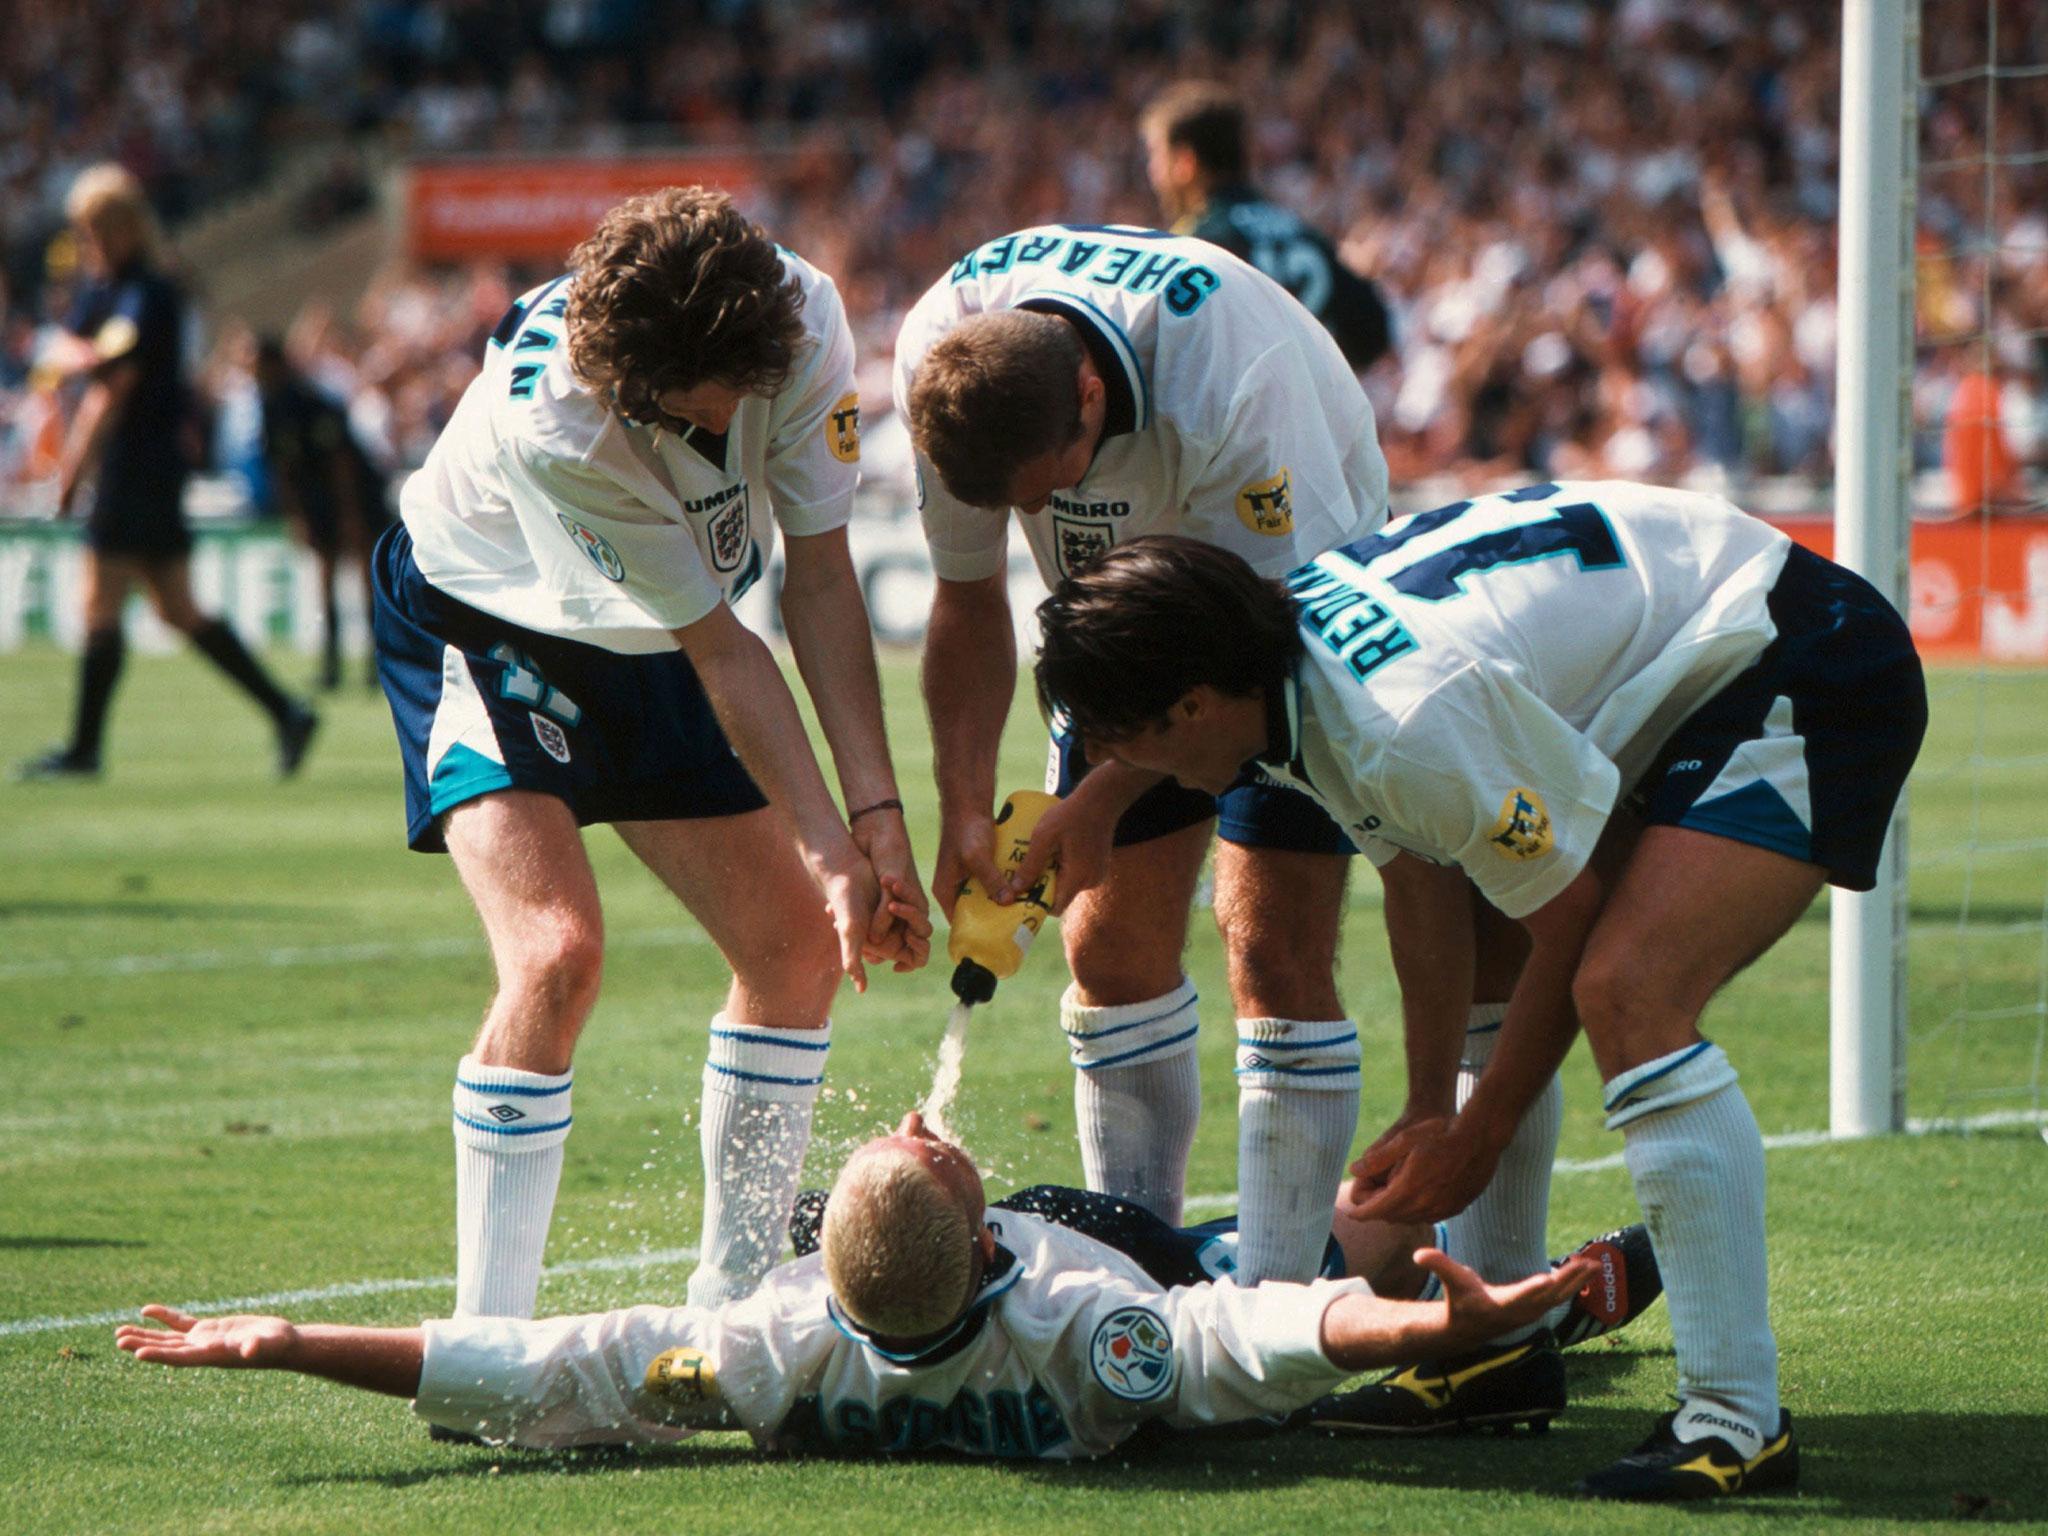 Euro 1996 was England's greatest recent success - can they recreate it next summer?